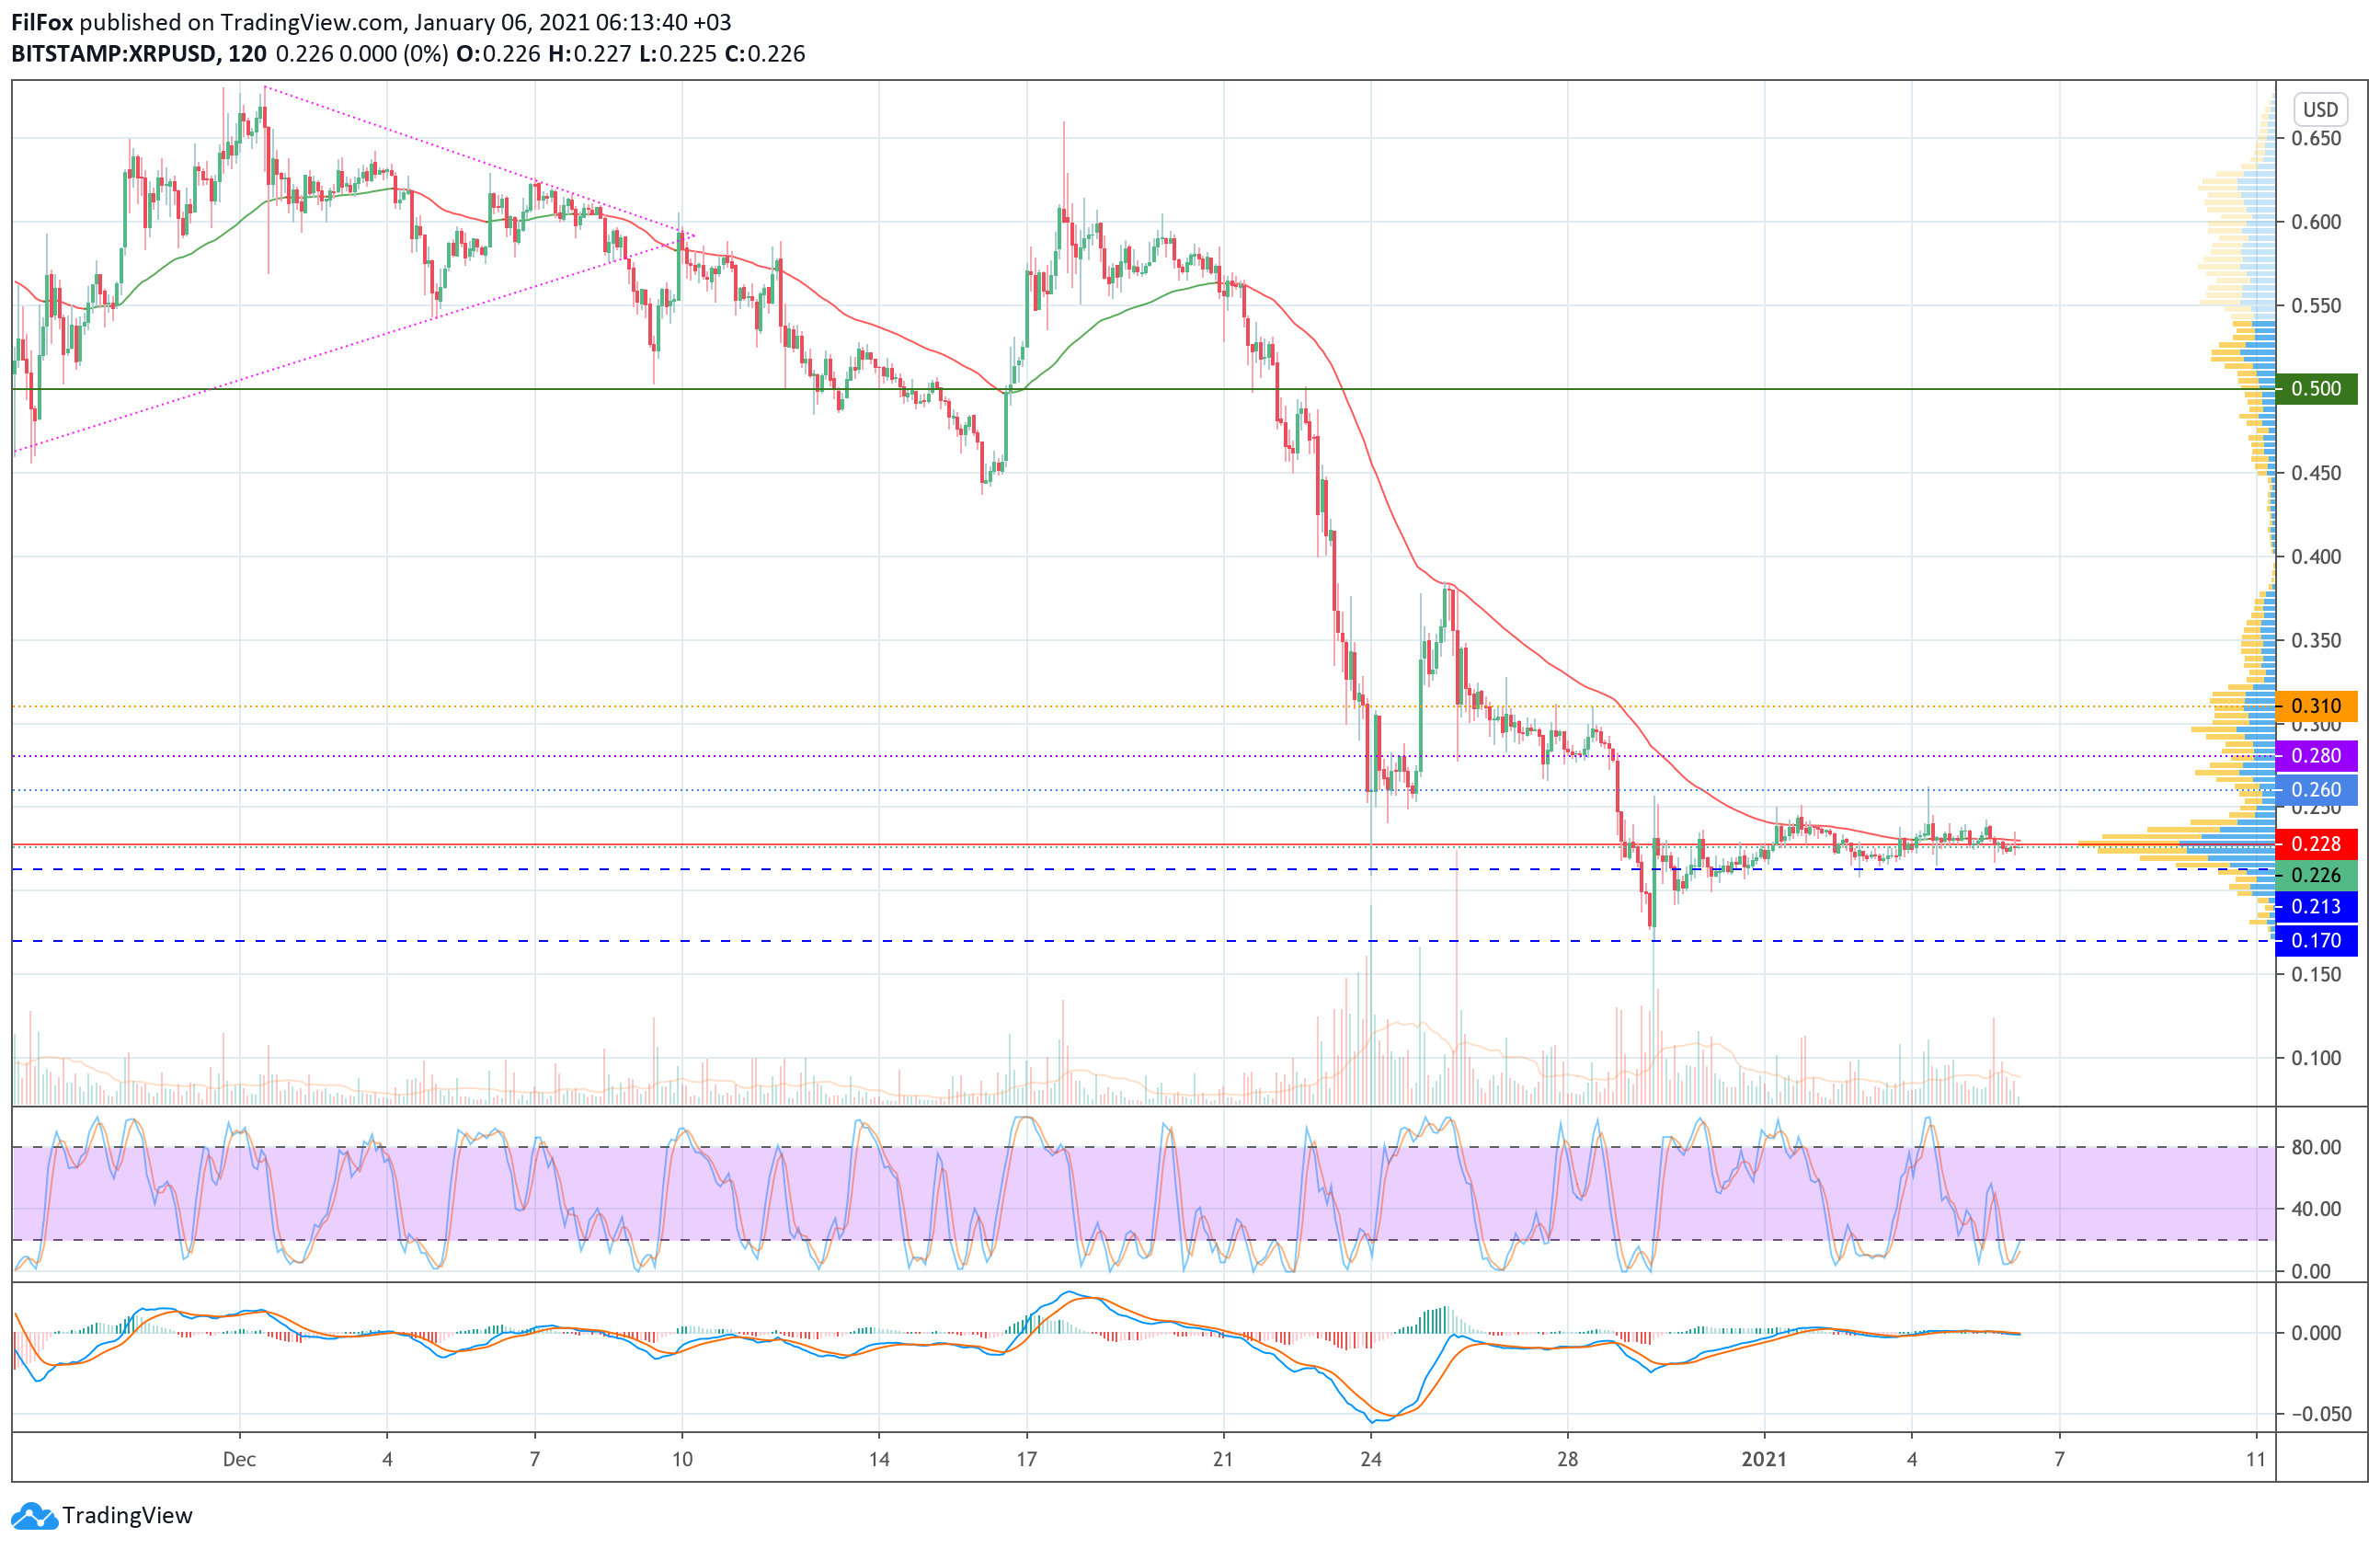 Analysis of prices for Bitcoin, Ethereum, Ripple for 01/06/2021